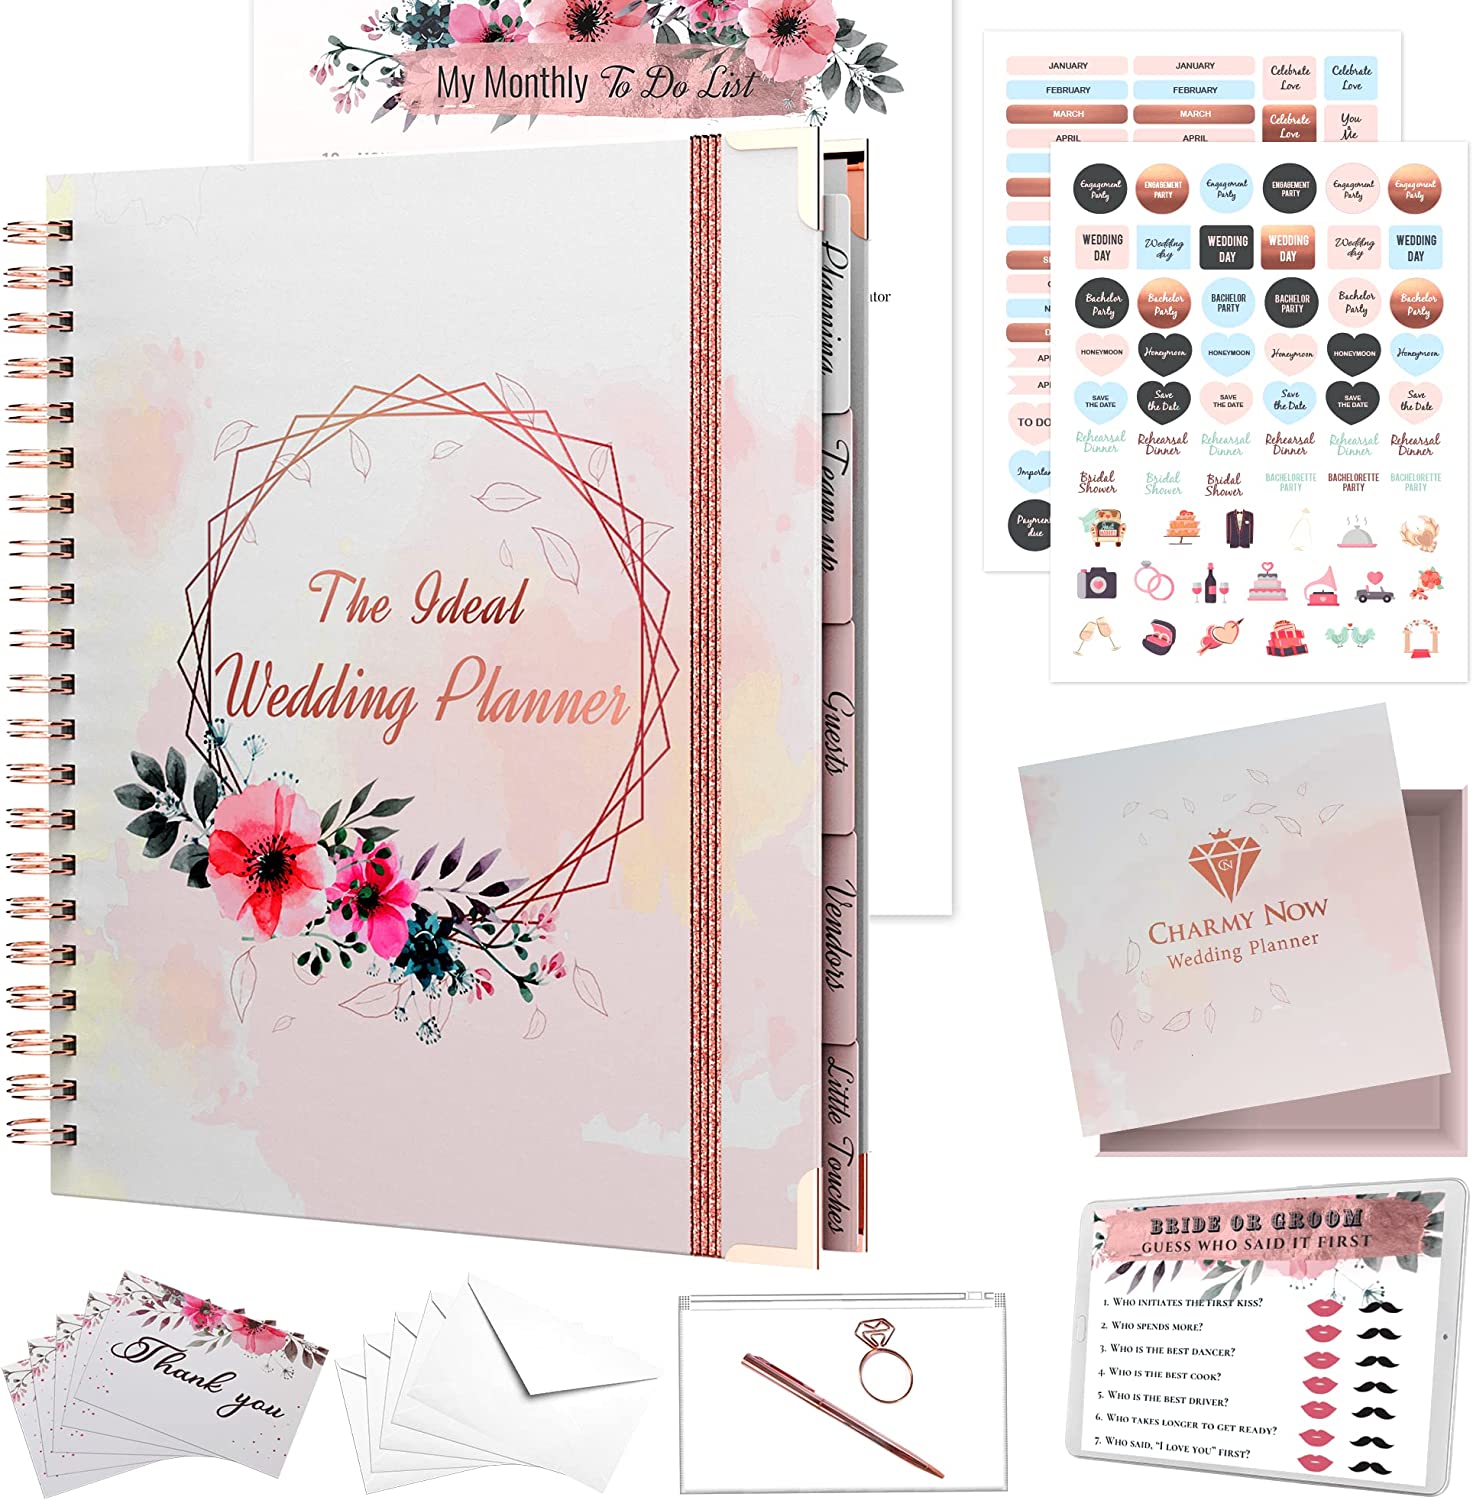 Wedding Planner Book and Organizer For The Bride - Rose Gold Kit with Stickers, Pen, Cards, Pouch & Gift Box | Future Mrs Gifts Wedding Planning Book | Engagement Gifts for Women | Bride To Be Gifts for Her by CHARMY NOW on Amazon